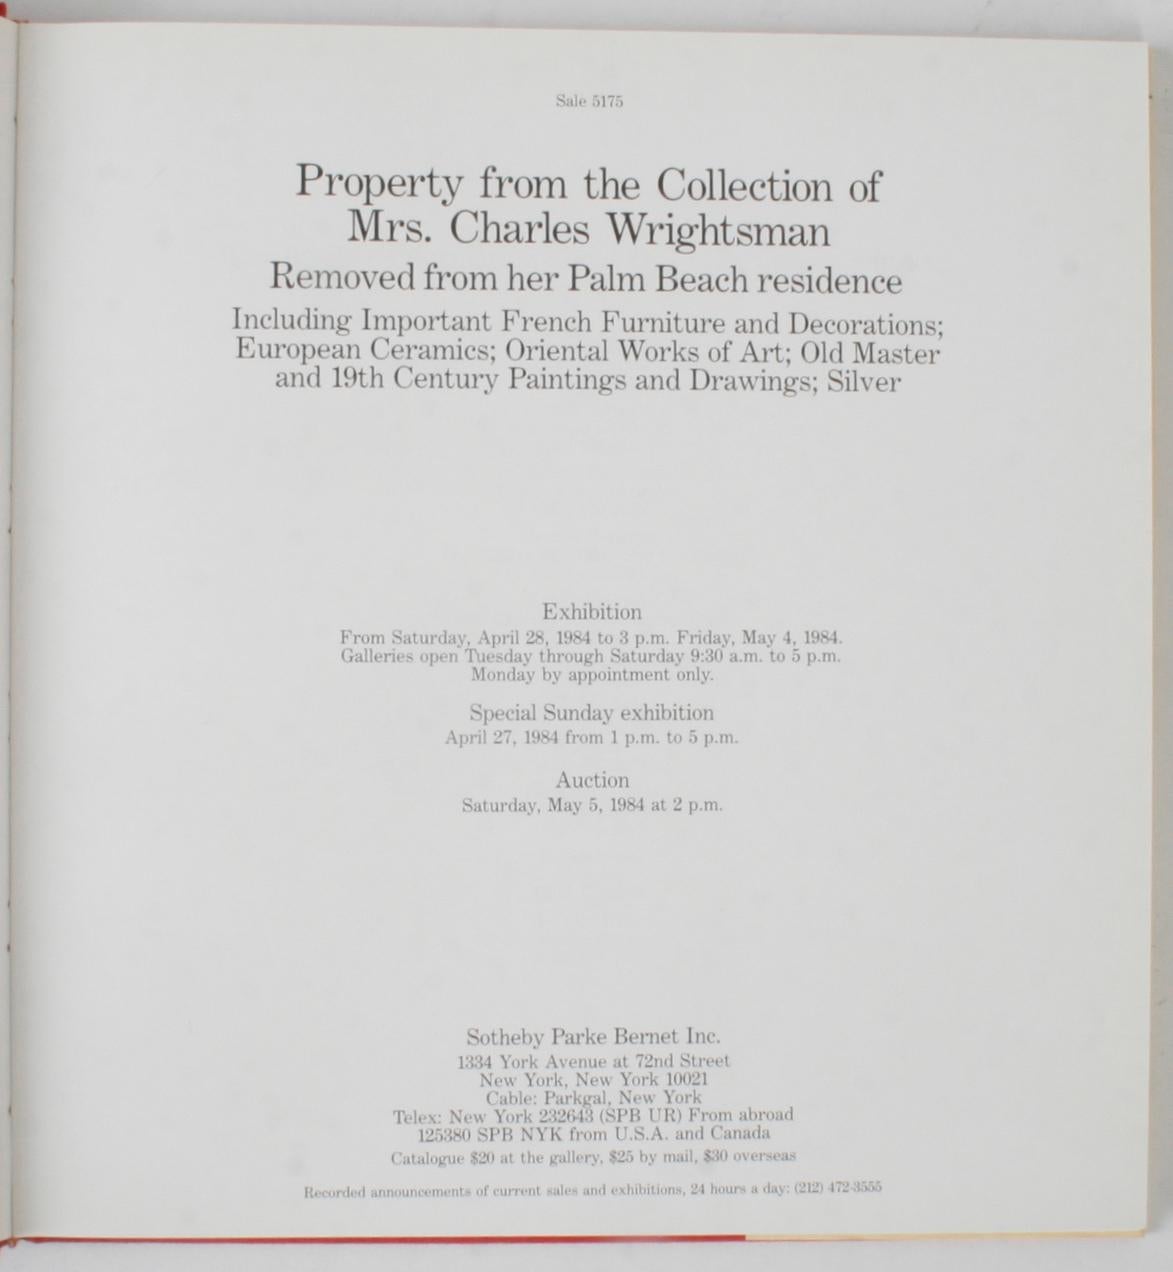 Sotheby's Auction Catalogue for the Property from the collection of Mrs. Charles Wrightsman Removed from her Palm Beach Residence. New York: Sotheby's, 1984. First edition hardcover with dust jacket. 247 pp. Sotheby's auction was held Saturday May